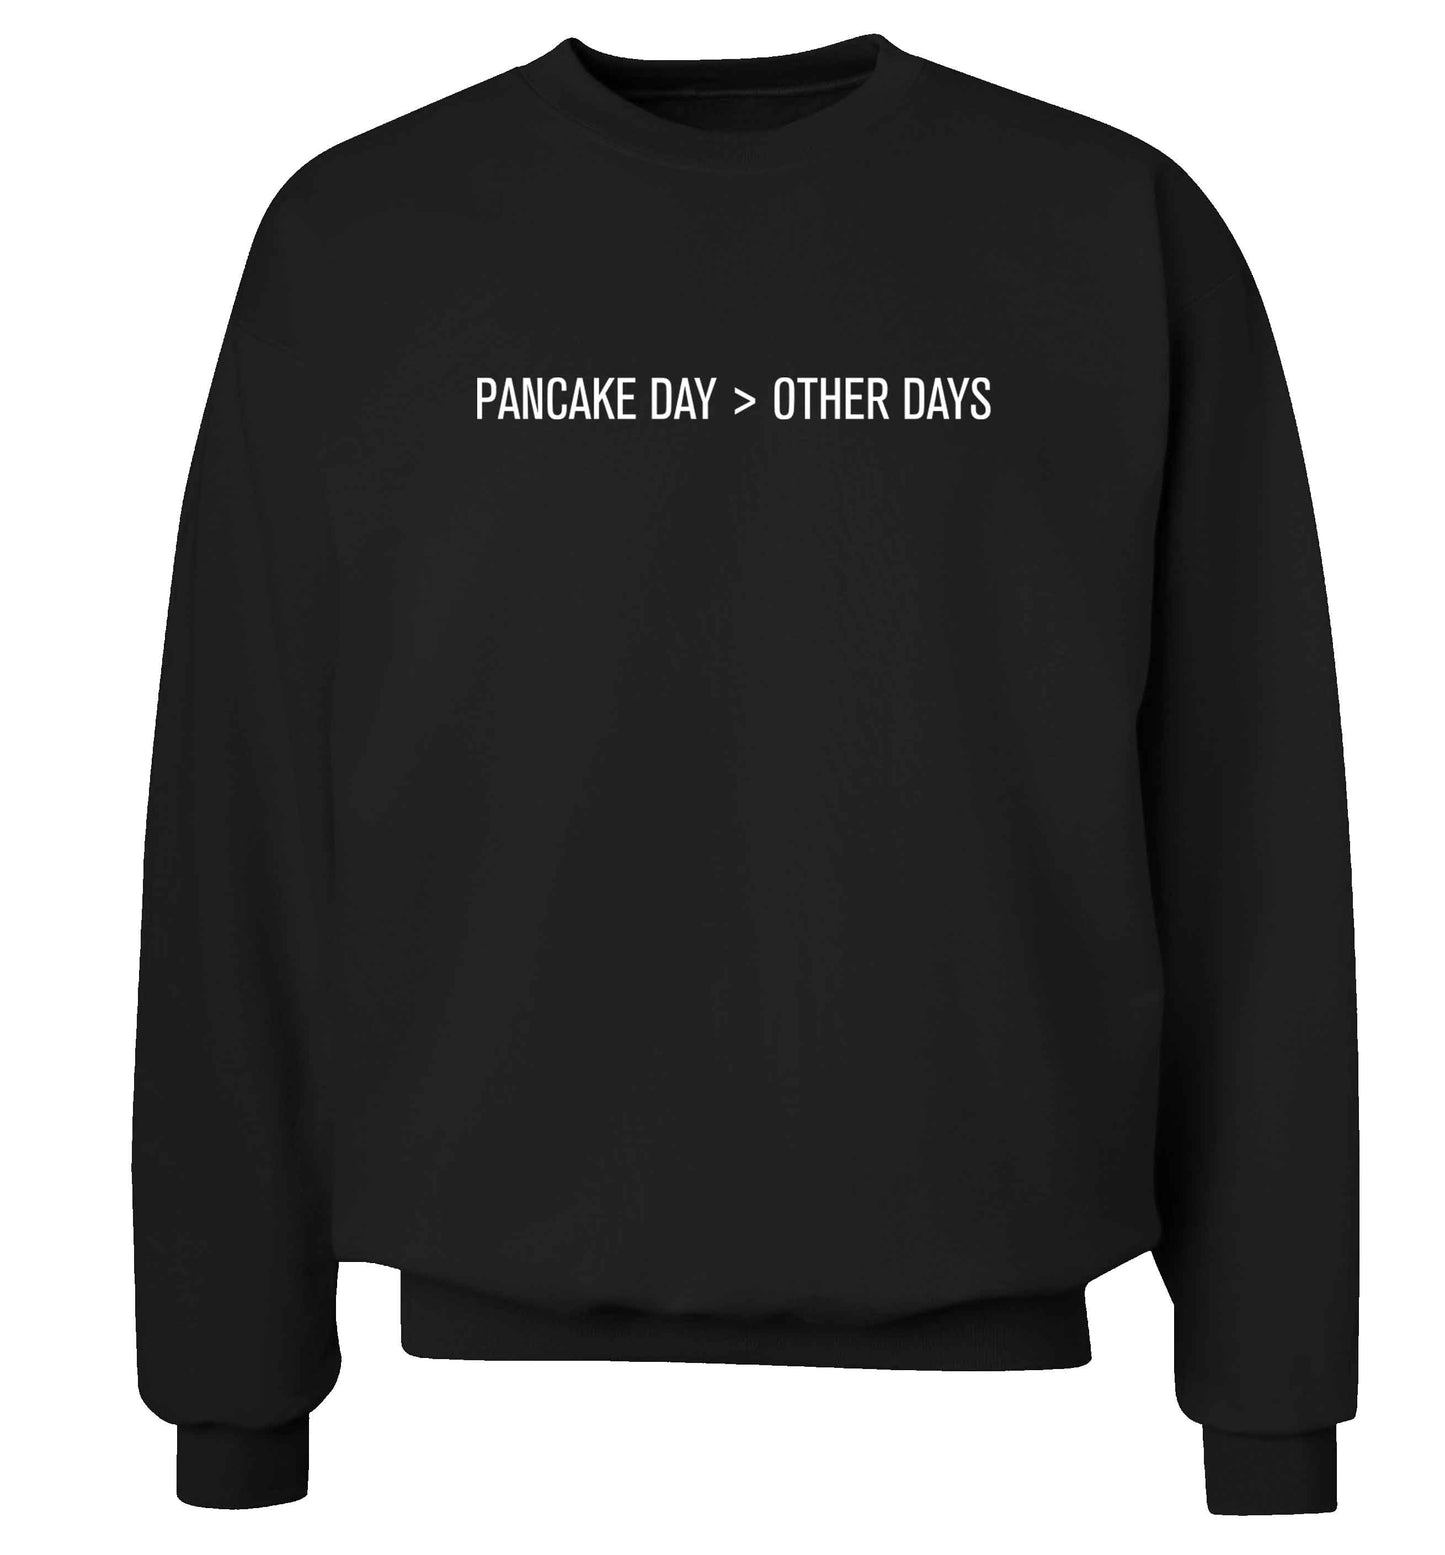 Pancake day > other days adult's unisex black sweater 2XL